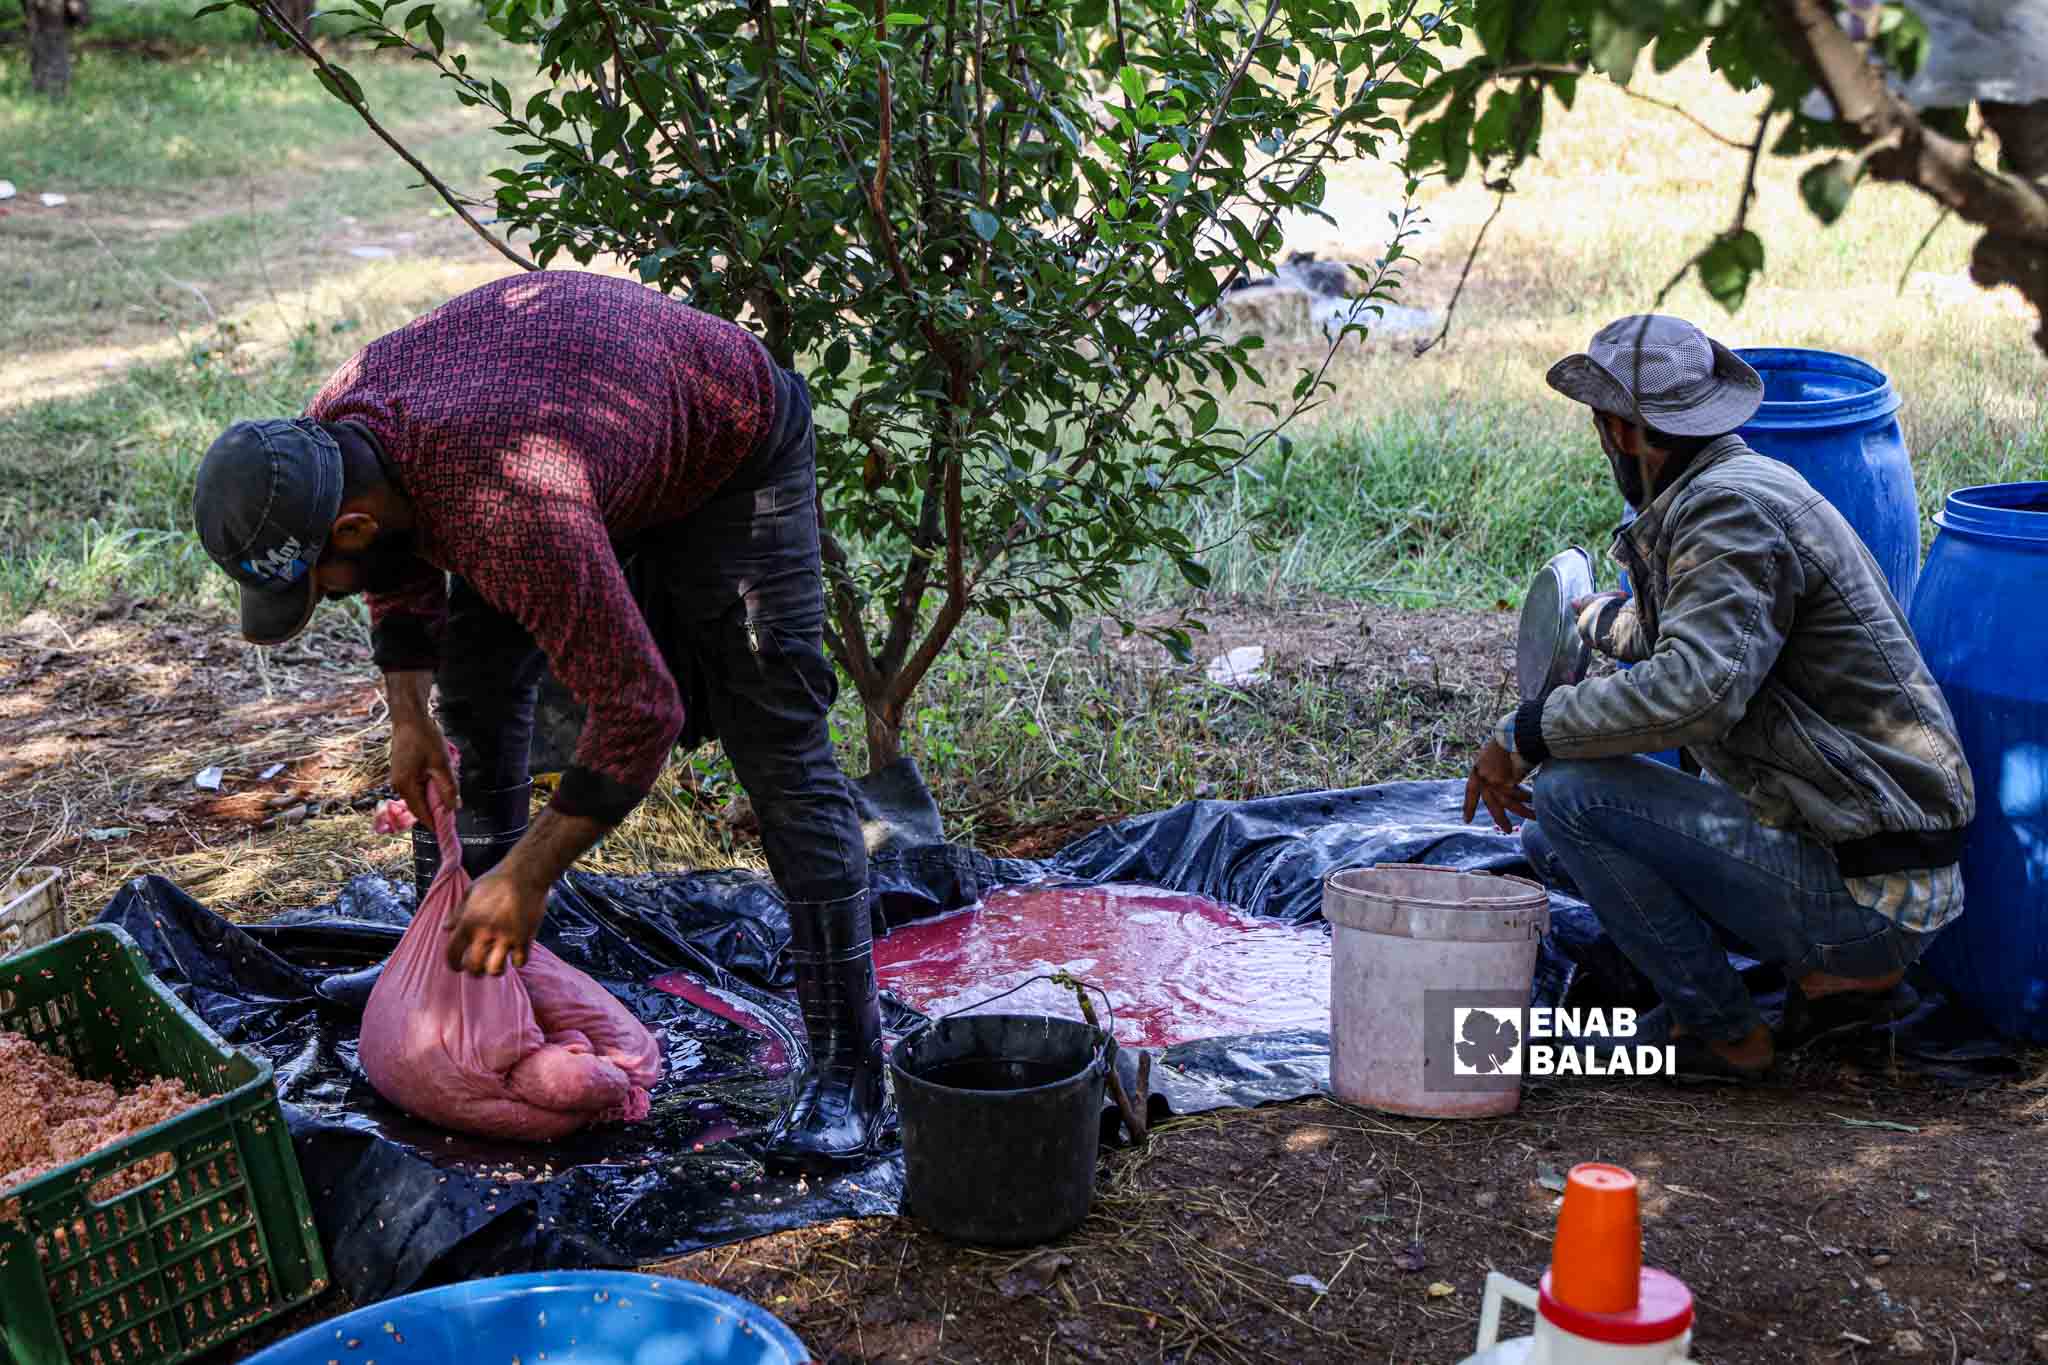 Farmers squeeze pomegranates and boil the juice in the traditional way to use later in the making of molasses in Basoutah village in Afrin region, Aleppo countryside - 18 October 2022 (Enab Baladi / Amir Kharboutli)
